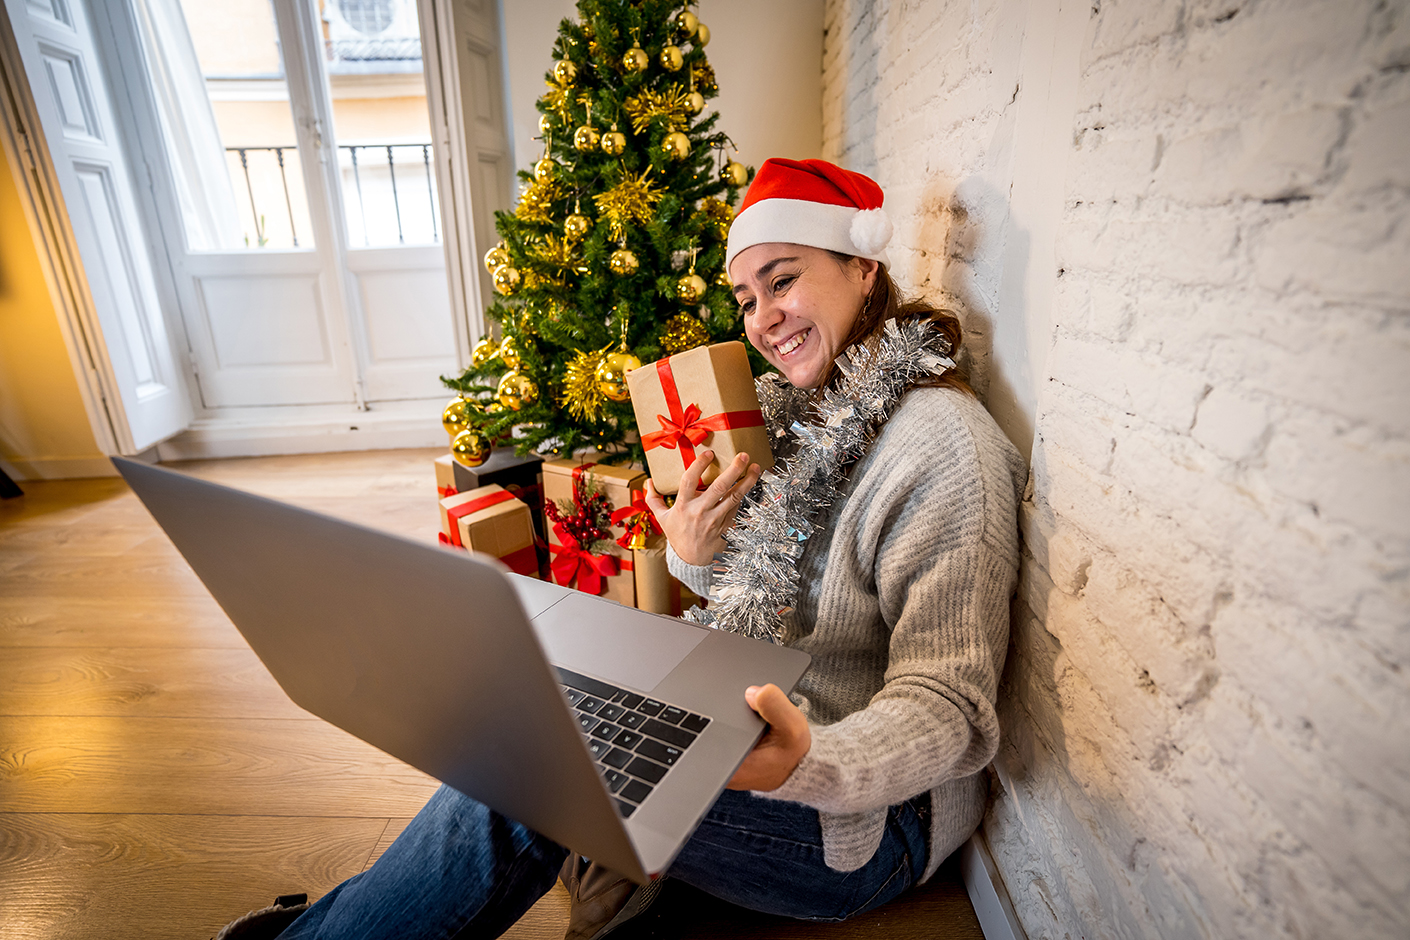 Happy woman alone in lockdown celebrating virtual christmas video calling family and friends.